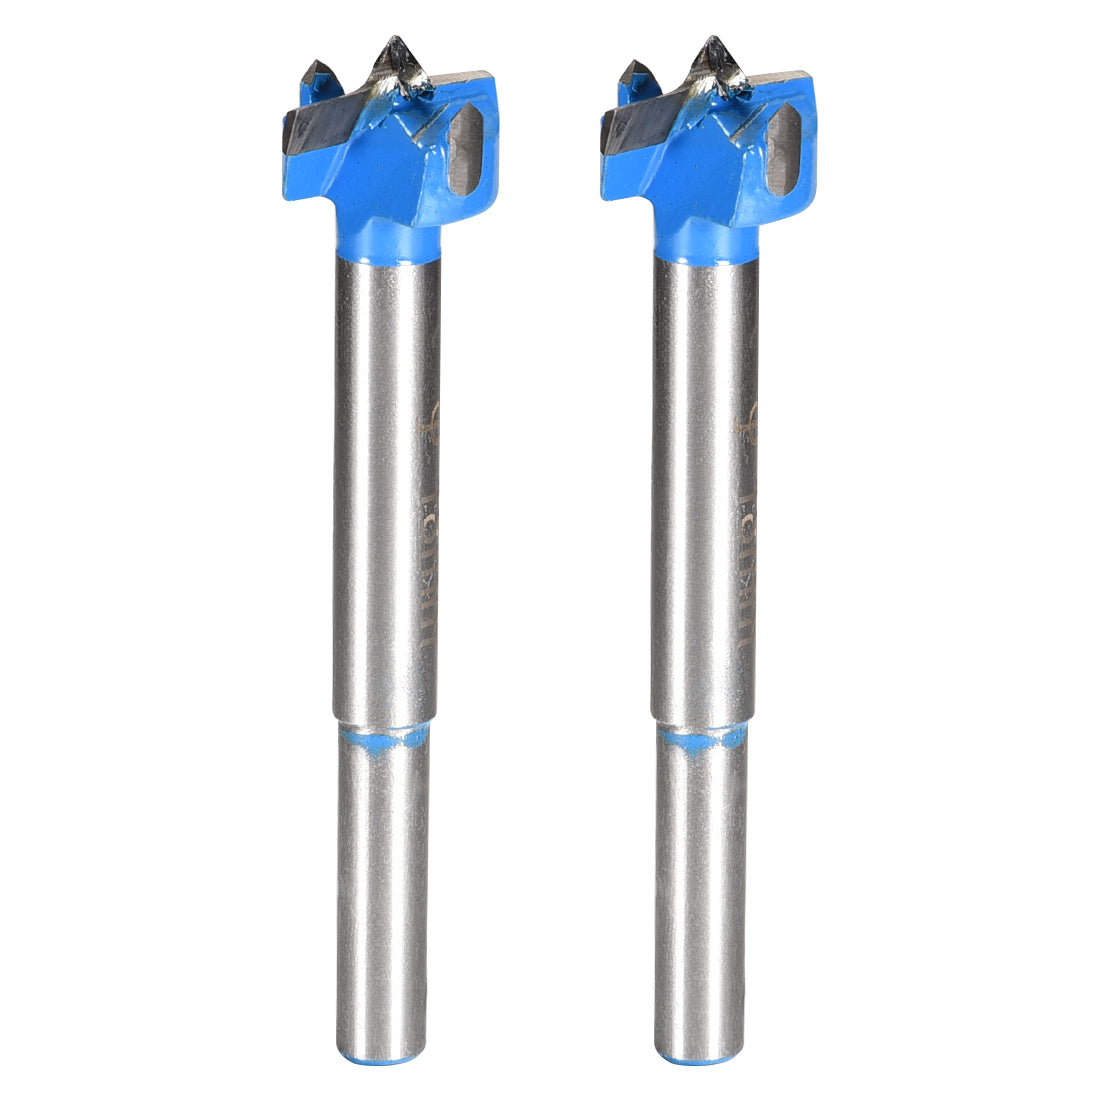 Uxcell Uxcell Forstner Wood Boring Drill Bit 19mm Dia. Hole Saw Carbide Alloy Tip Steel Round Shank Cutting for Woodworking Blue 2Pcs